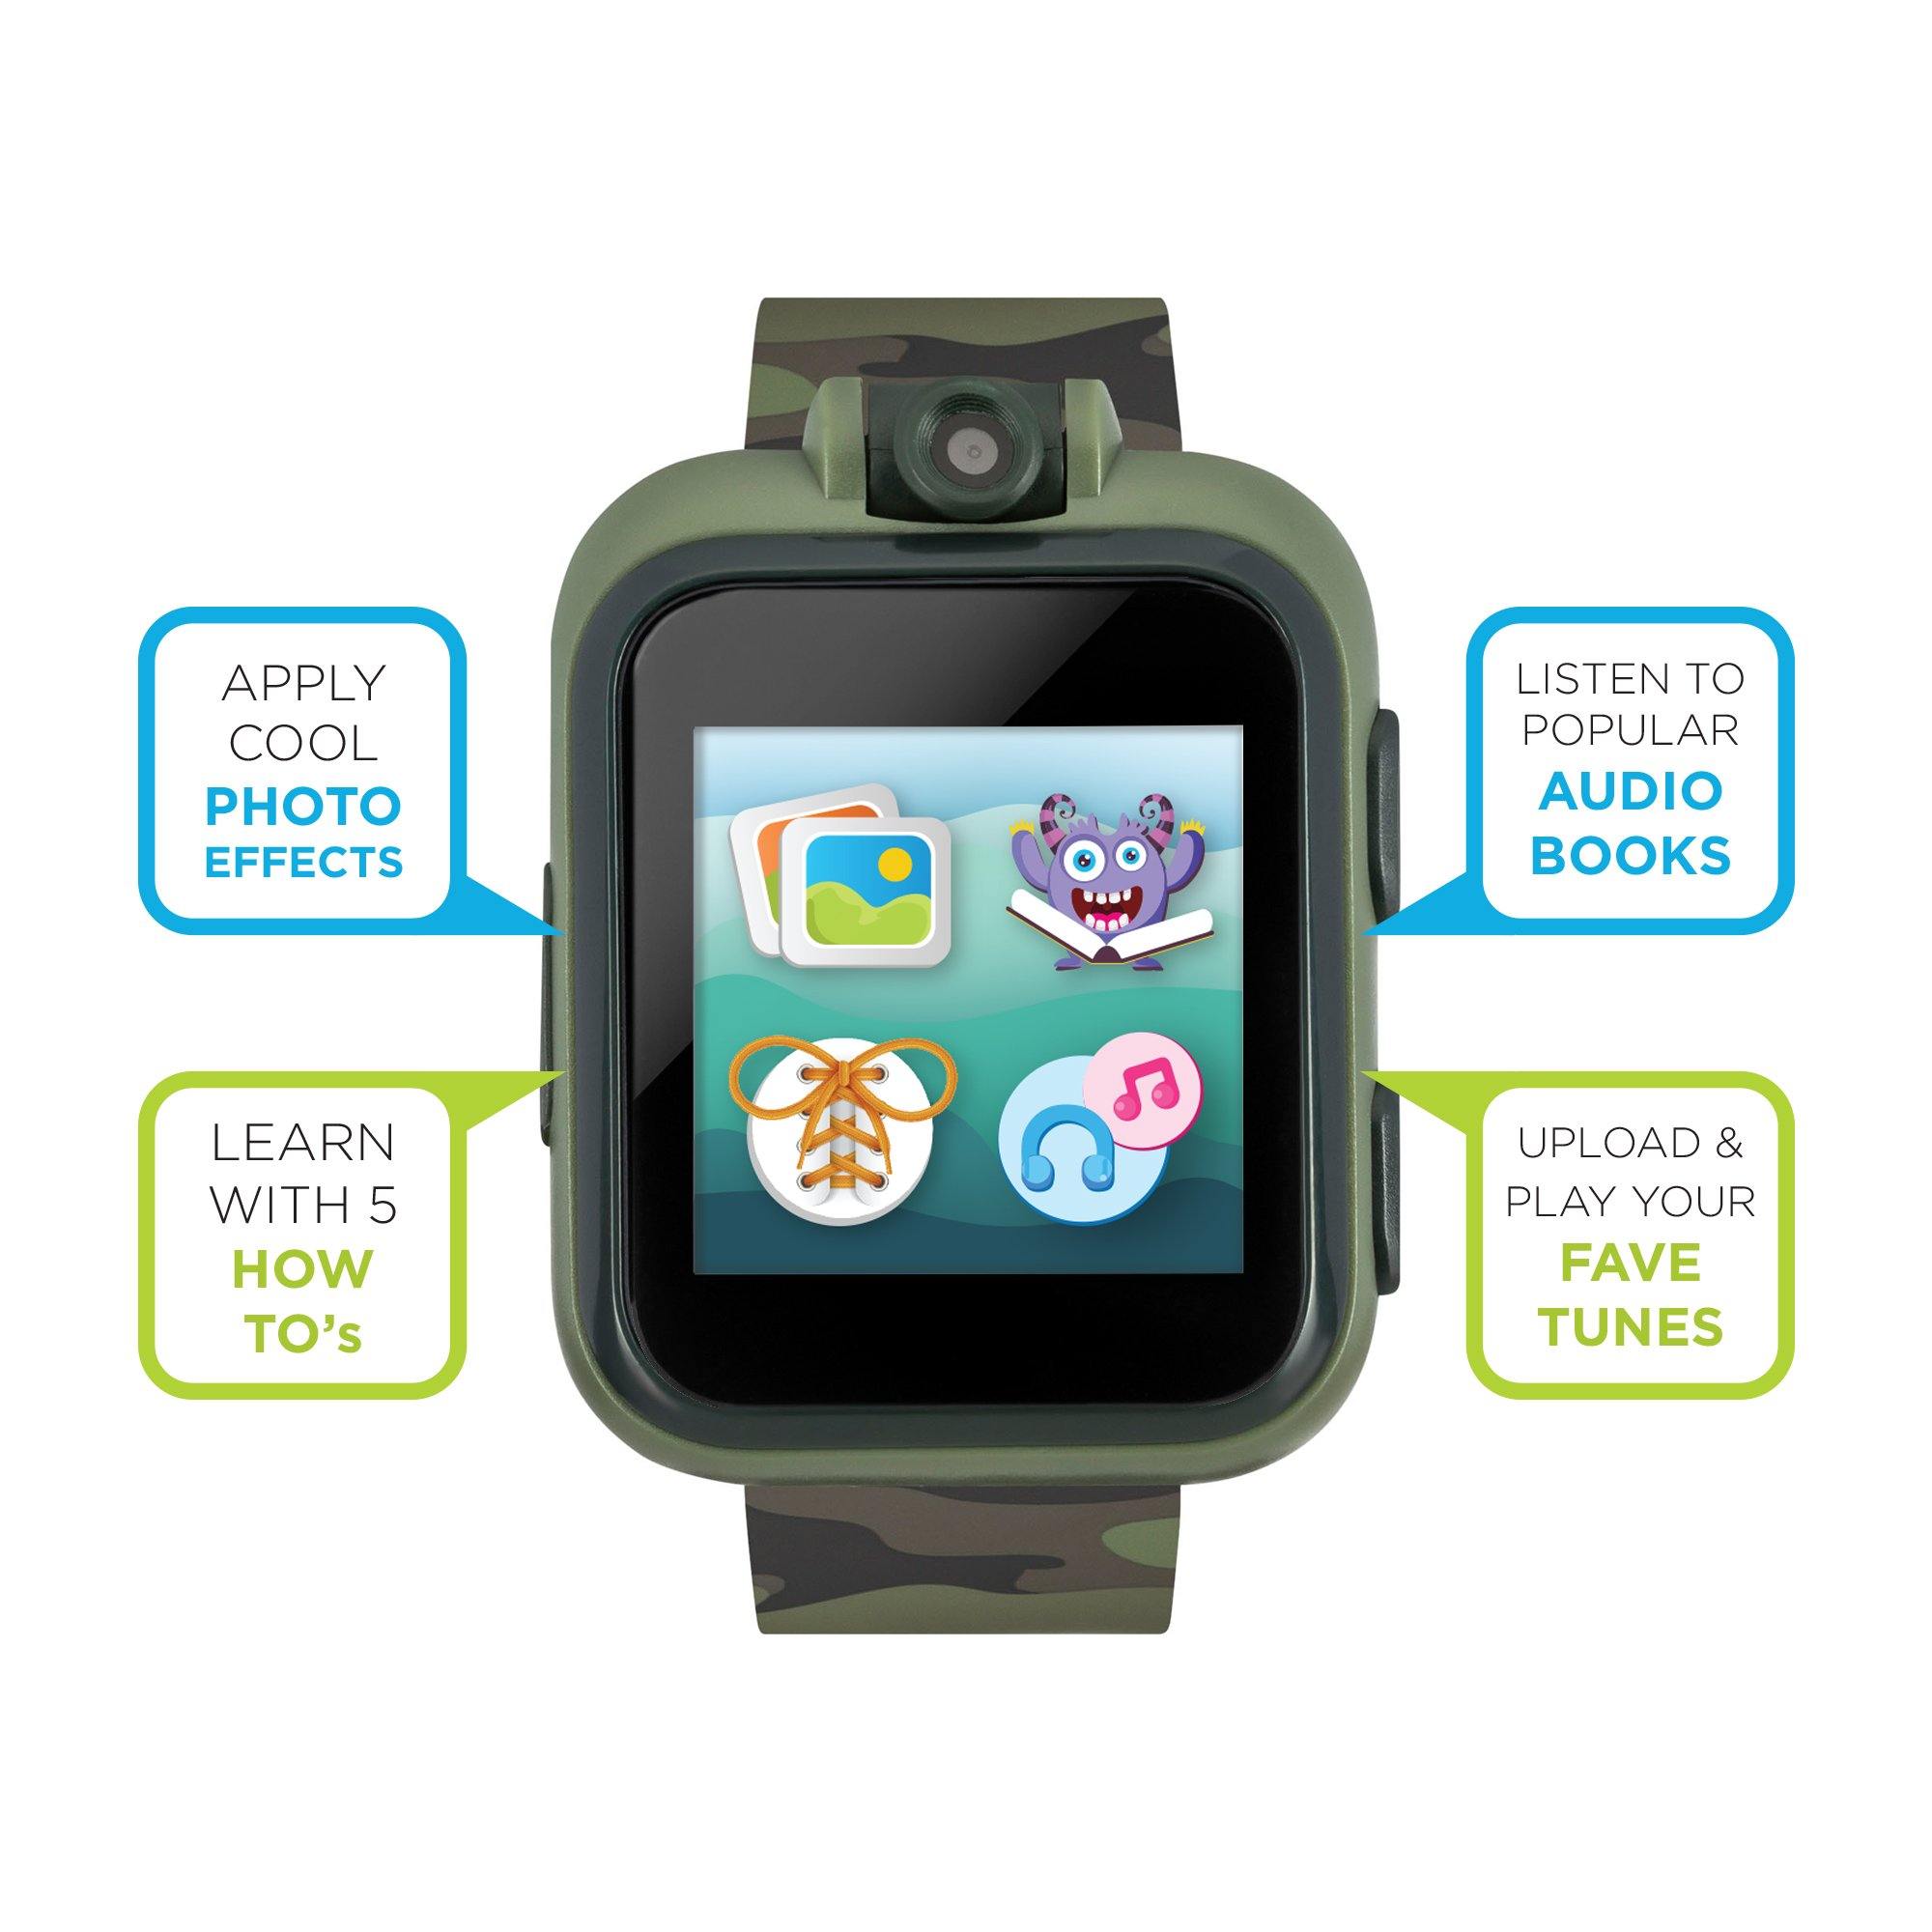 PlayZoom 2 Kids Smartwatch: Olive Camouflage Print affordable smart watch